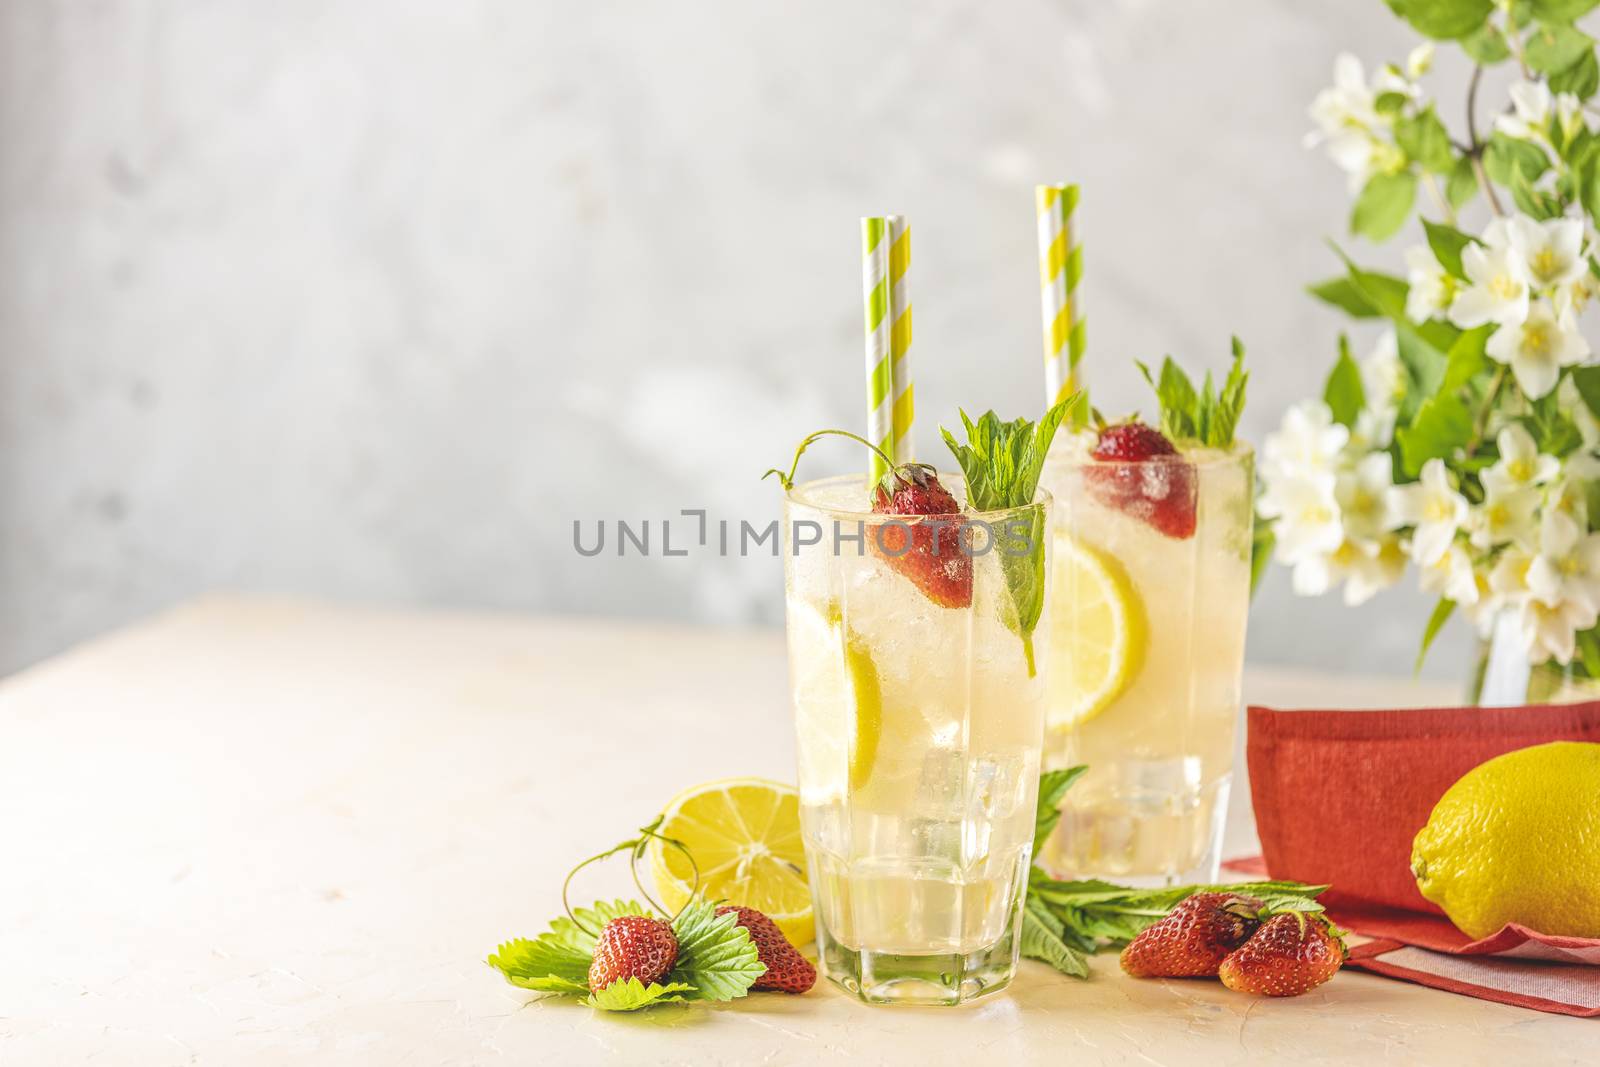 Two glasses of cold icy refreshing drink with lemon and strawberry served with bar tools on light pink table with white blooming flowers. Fresh cocktail drinks with ice fruit and herb decoration.